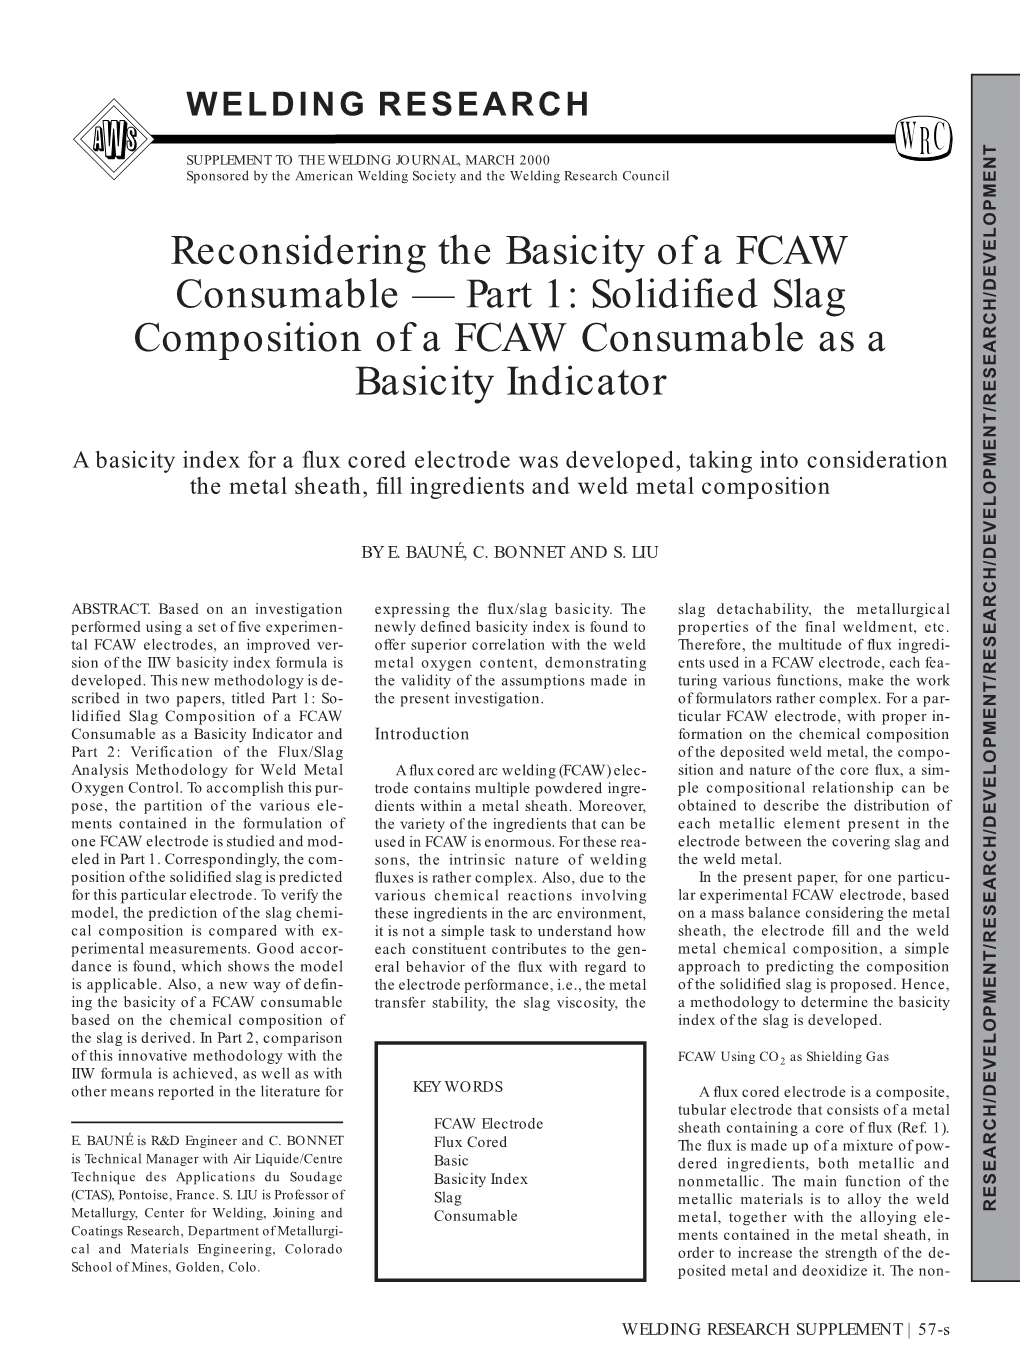 Reconsidering the Basicity of a FCAW Consumable — Part 1: Solidified Slag Composition of a FCAW Consumable As a Basicity Indicator